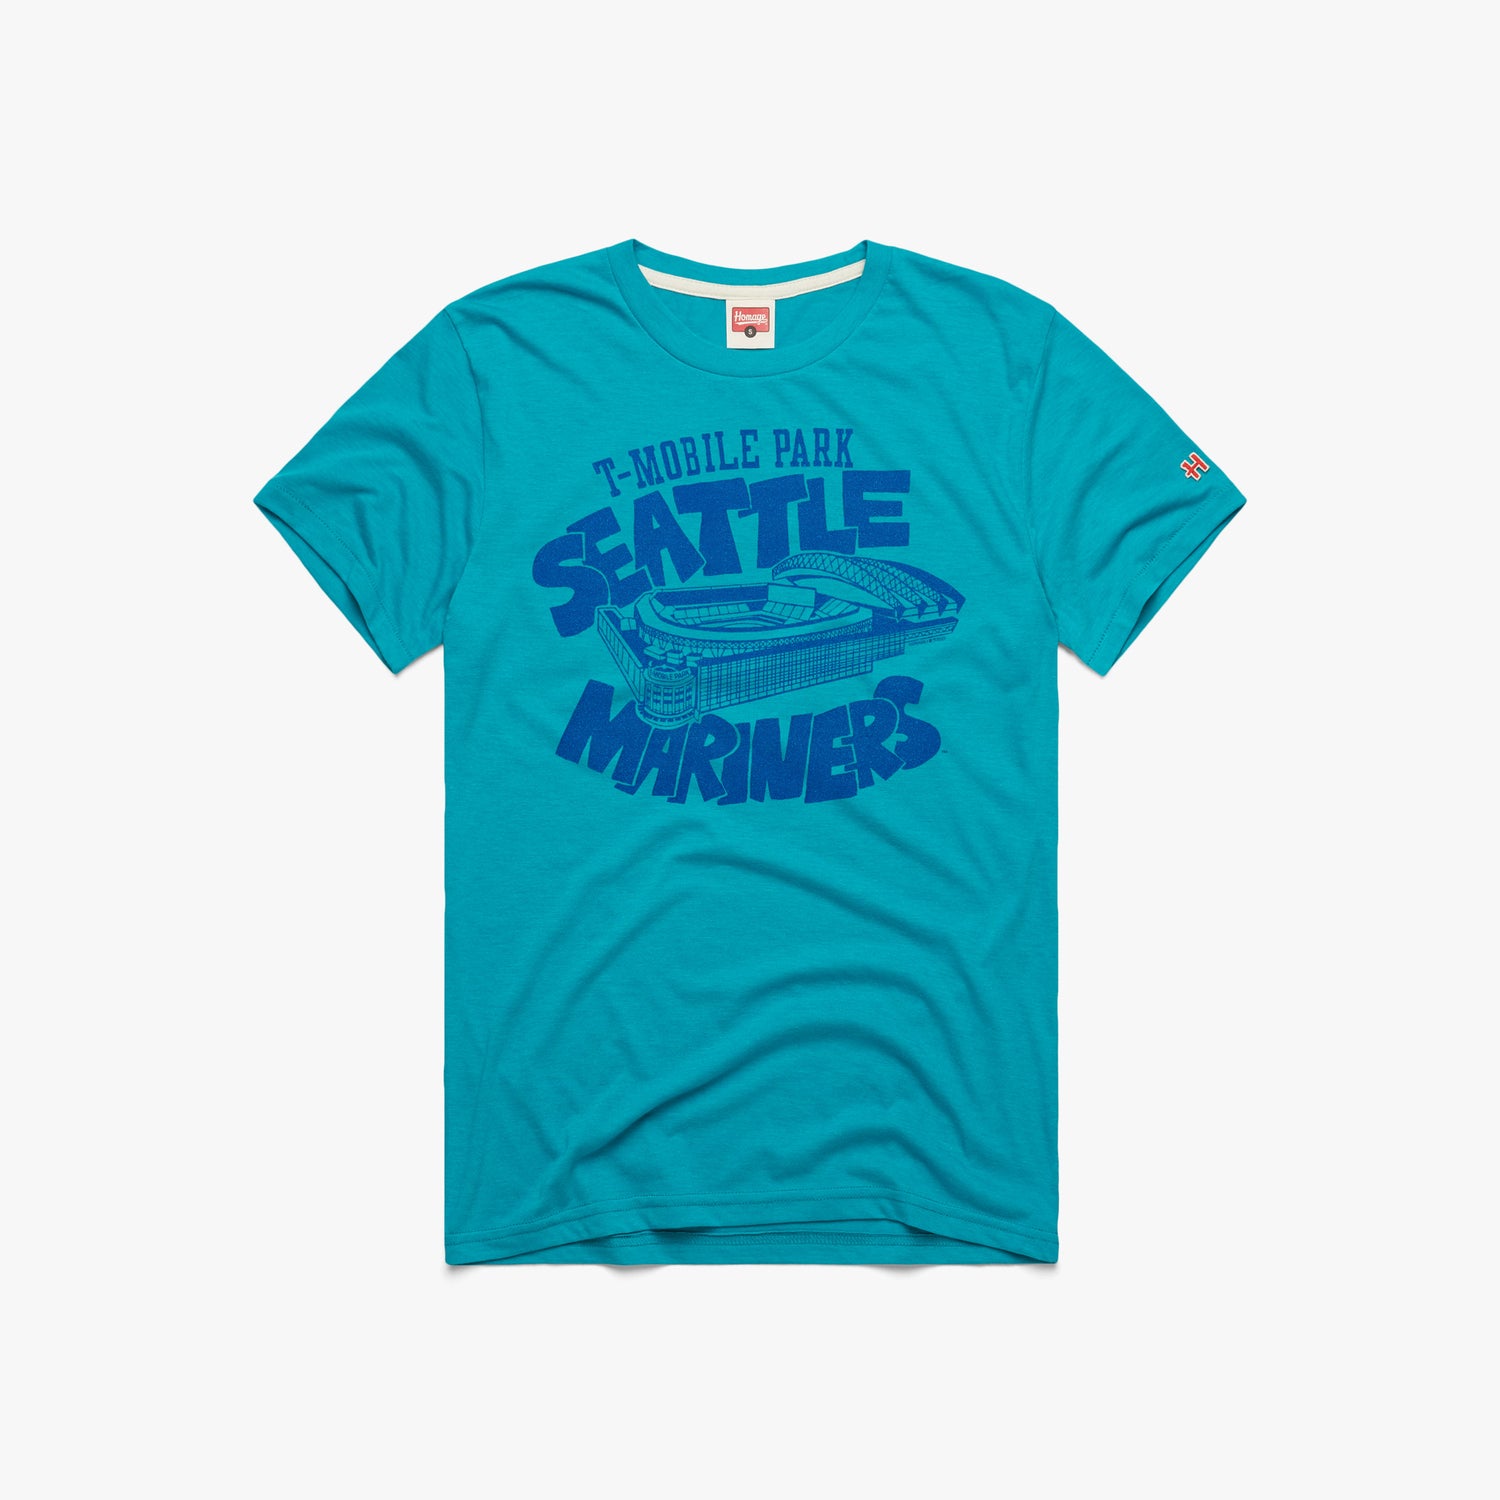 Seattle Mariners T-Mobile Park T-Shirt from Homage. | Teal | Vintage Apparel from Homage.